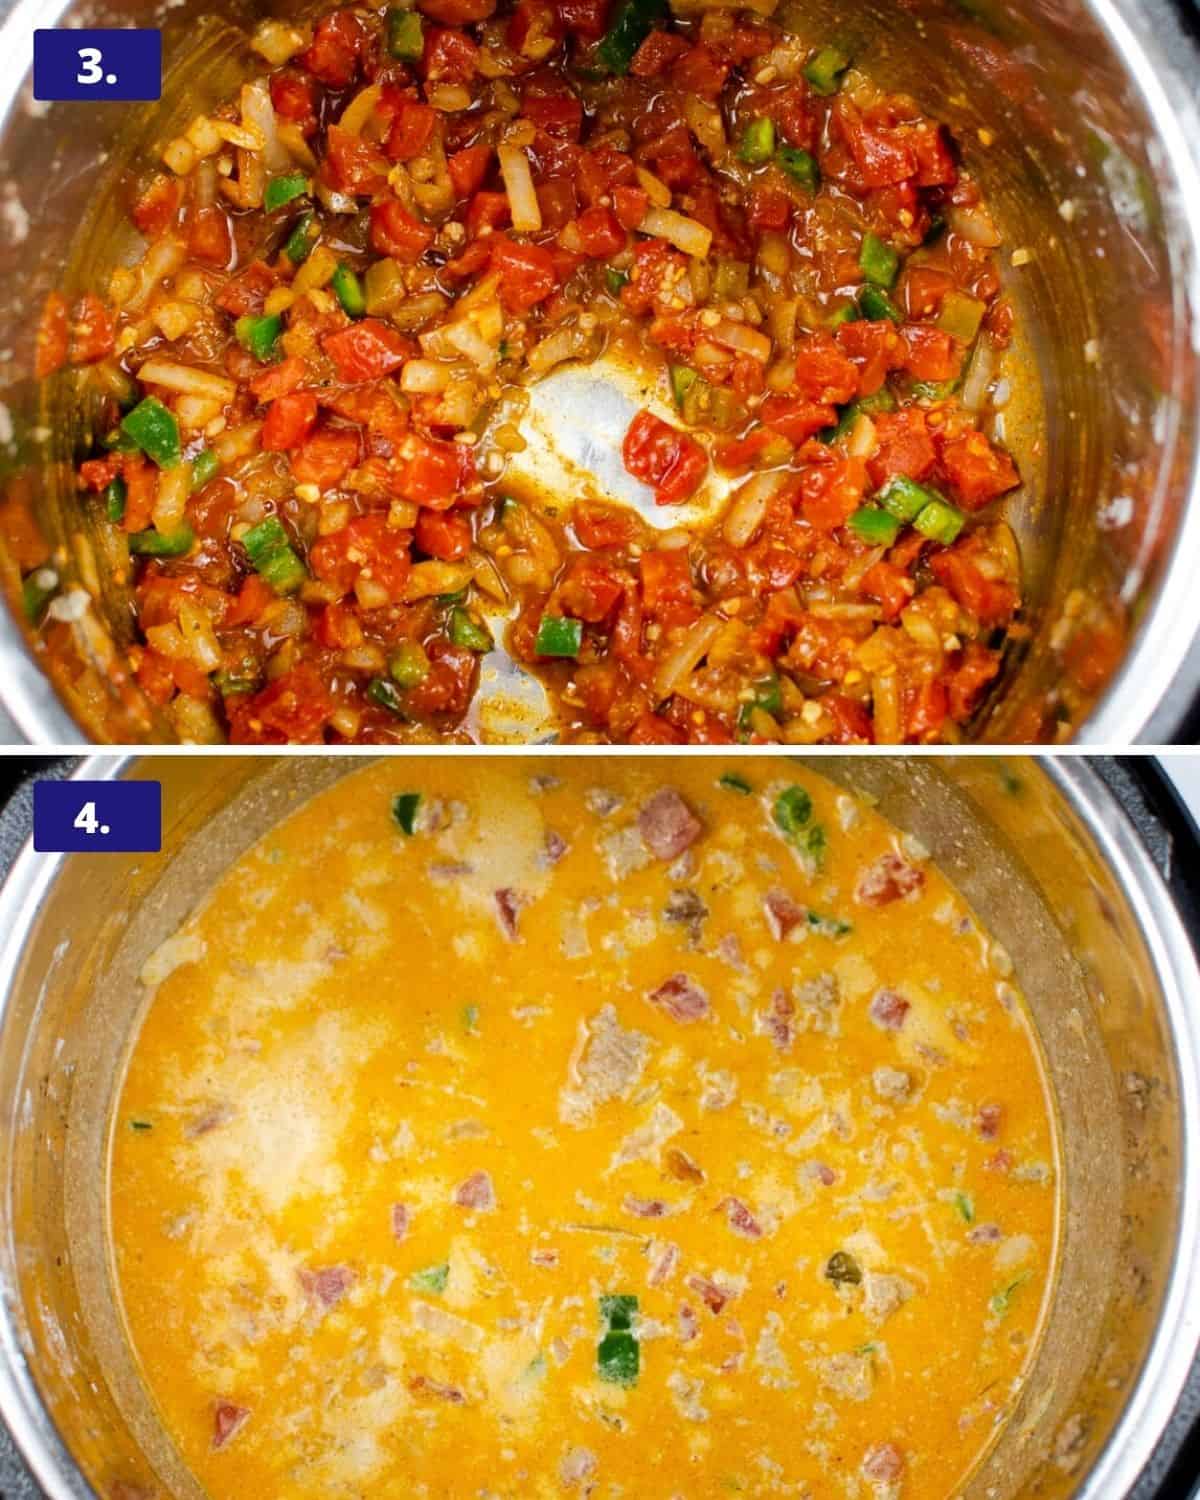 Two photos, the first is Rotel tomatoes added to sautéed jalapeños and onions. The second photo is an Instant pot with sautéed veggies with evaporated milk added to the pot.